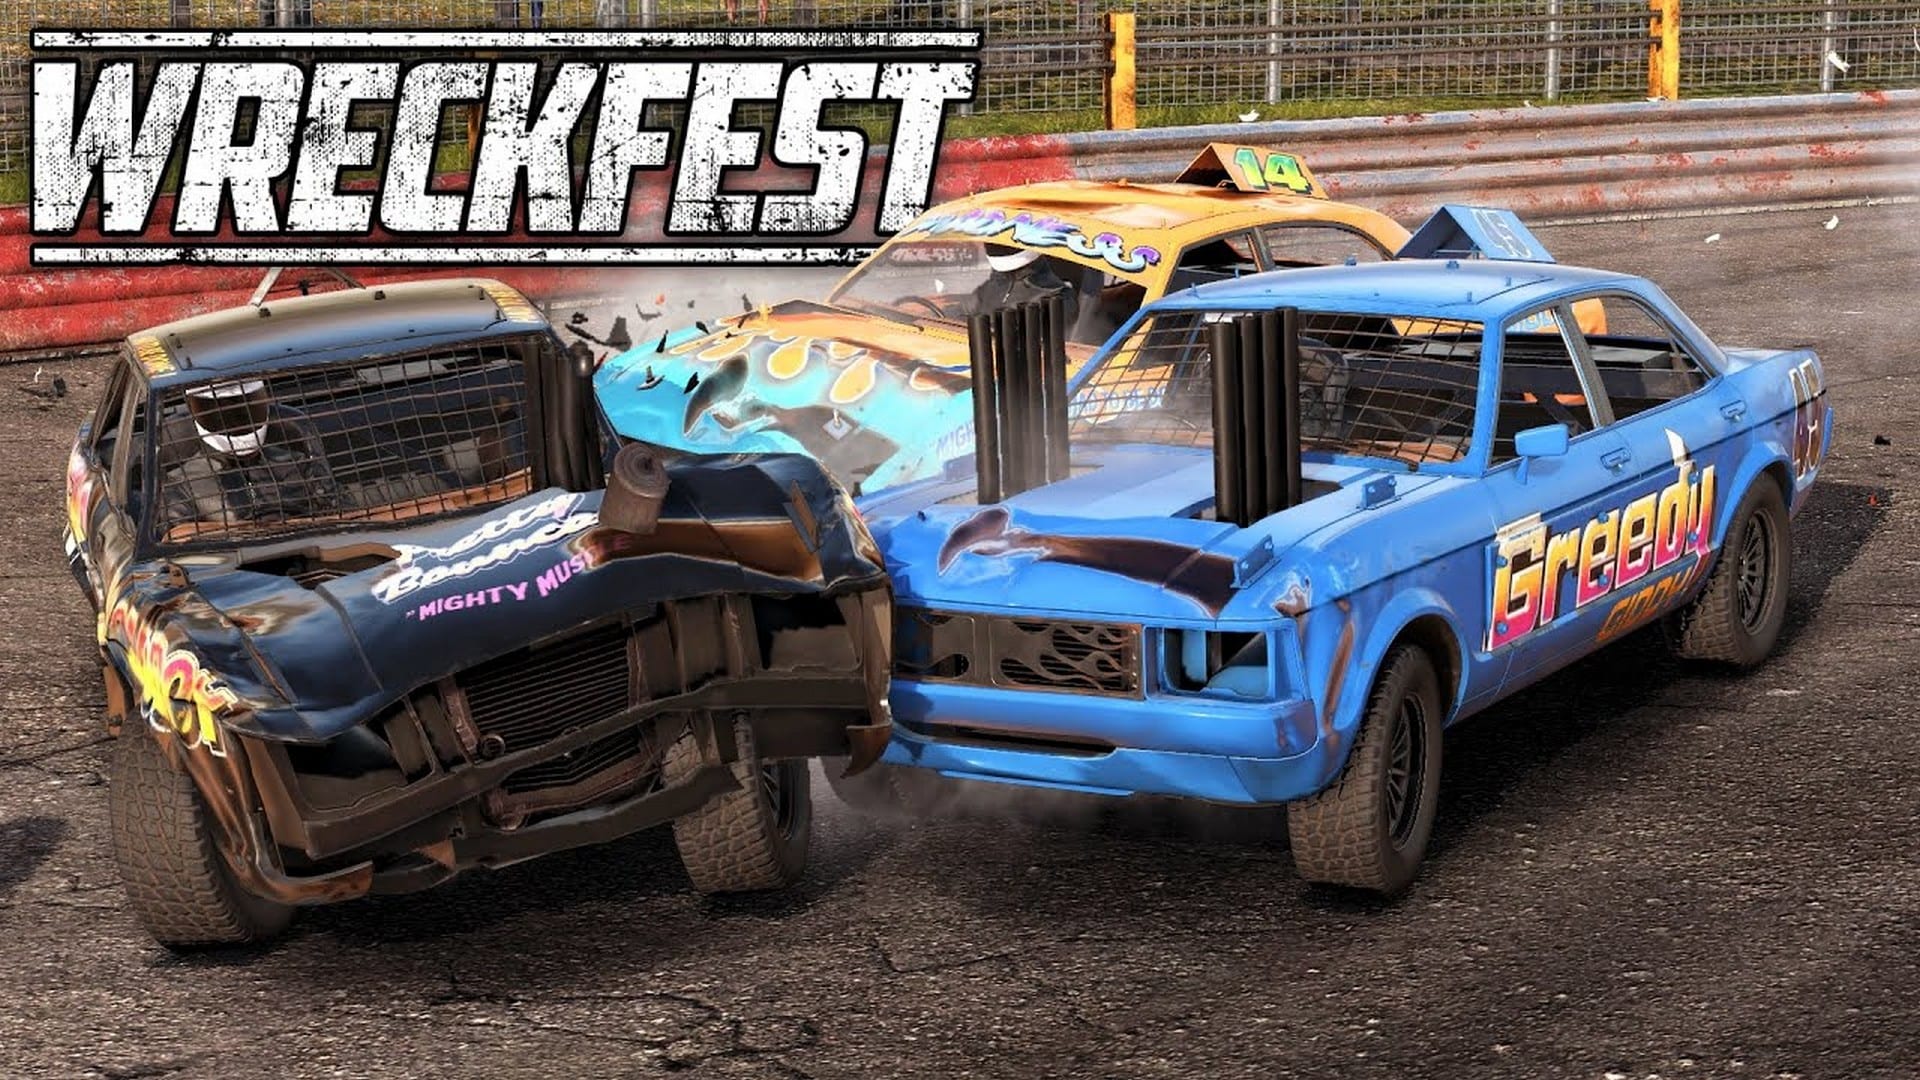 Wreckfest Concludes Its First Season With The Eighth DLC, The Banger Racing Car Pack – Out Now